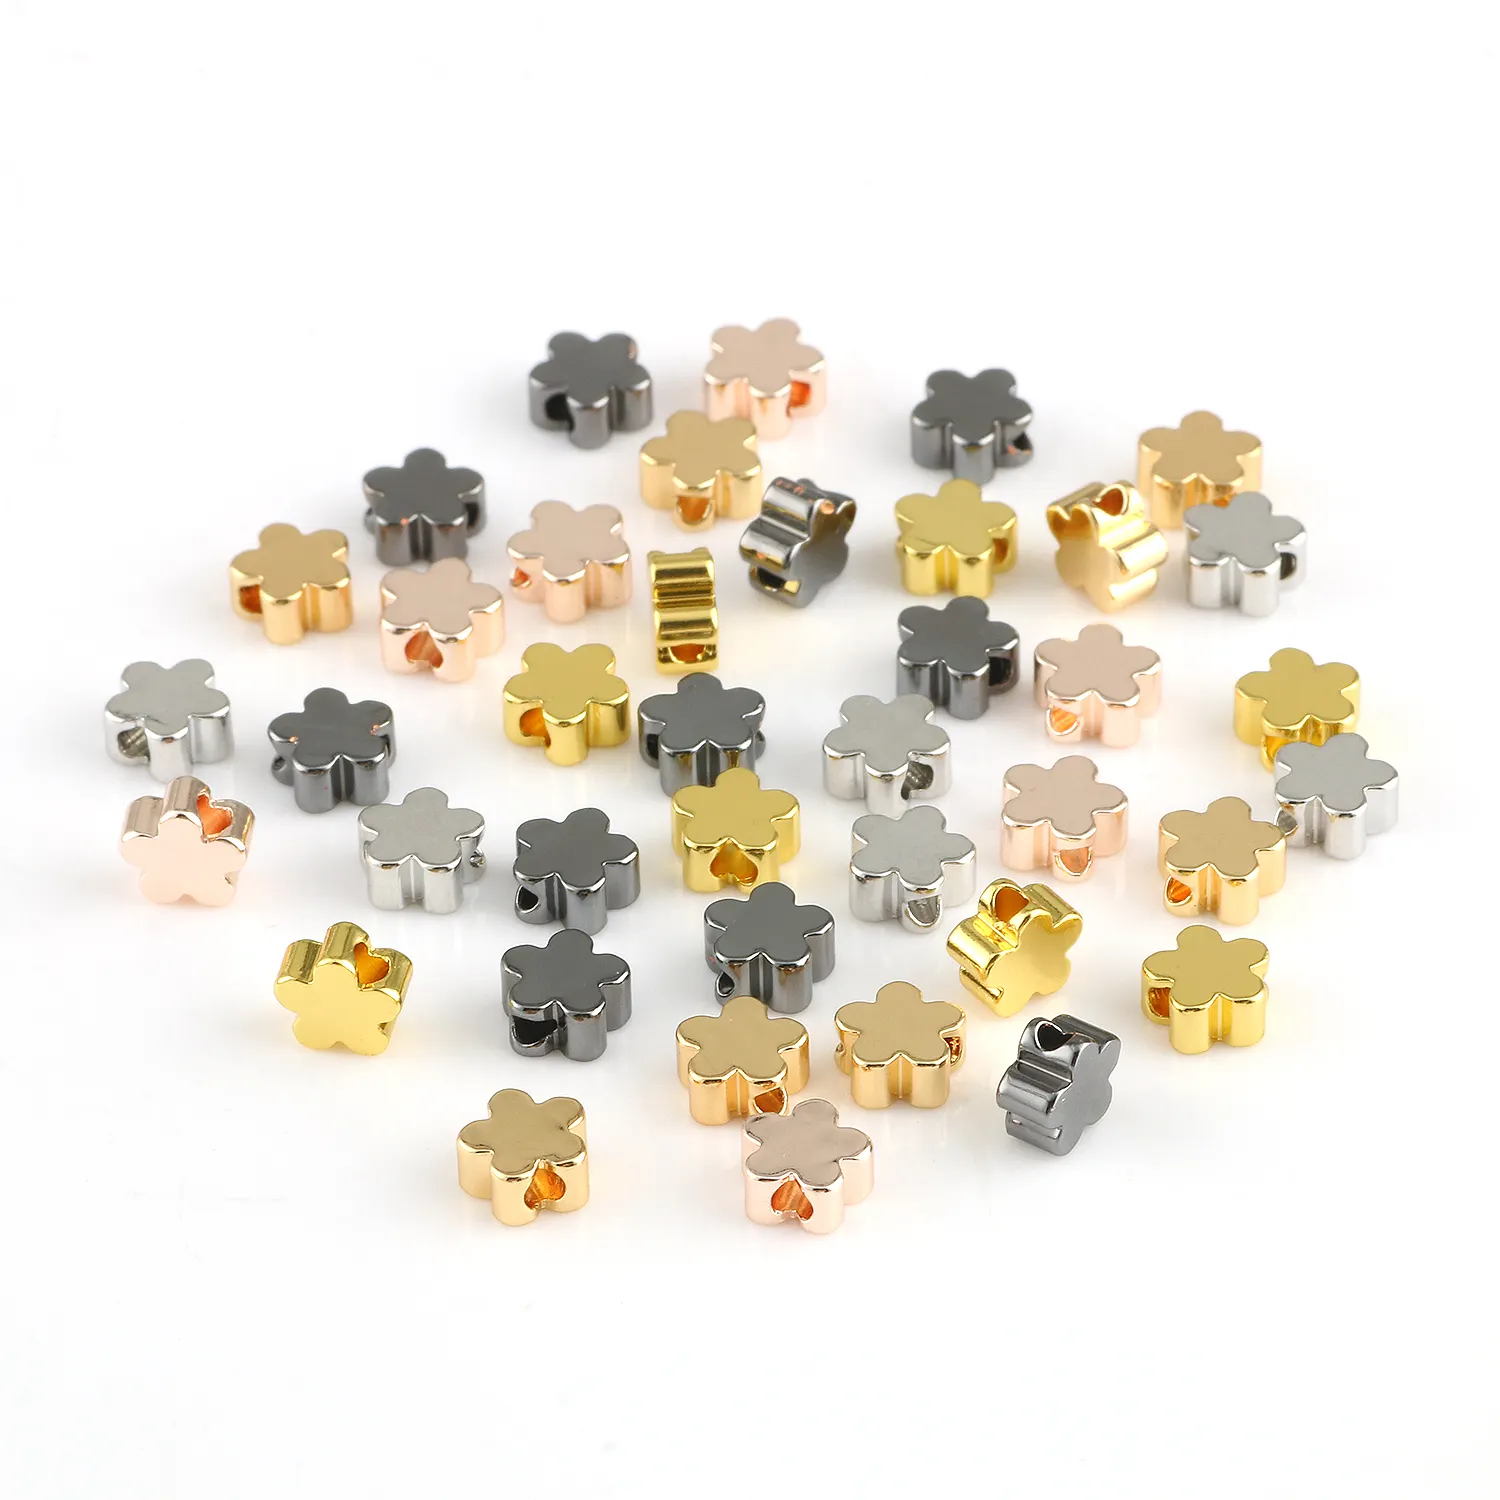 Good Quality 6x3mm Flower Shape Copper Metal Spacer Loose Beads for Jewelry Making Bracelet